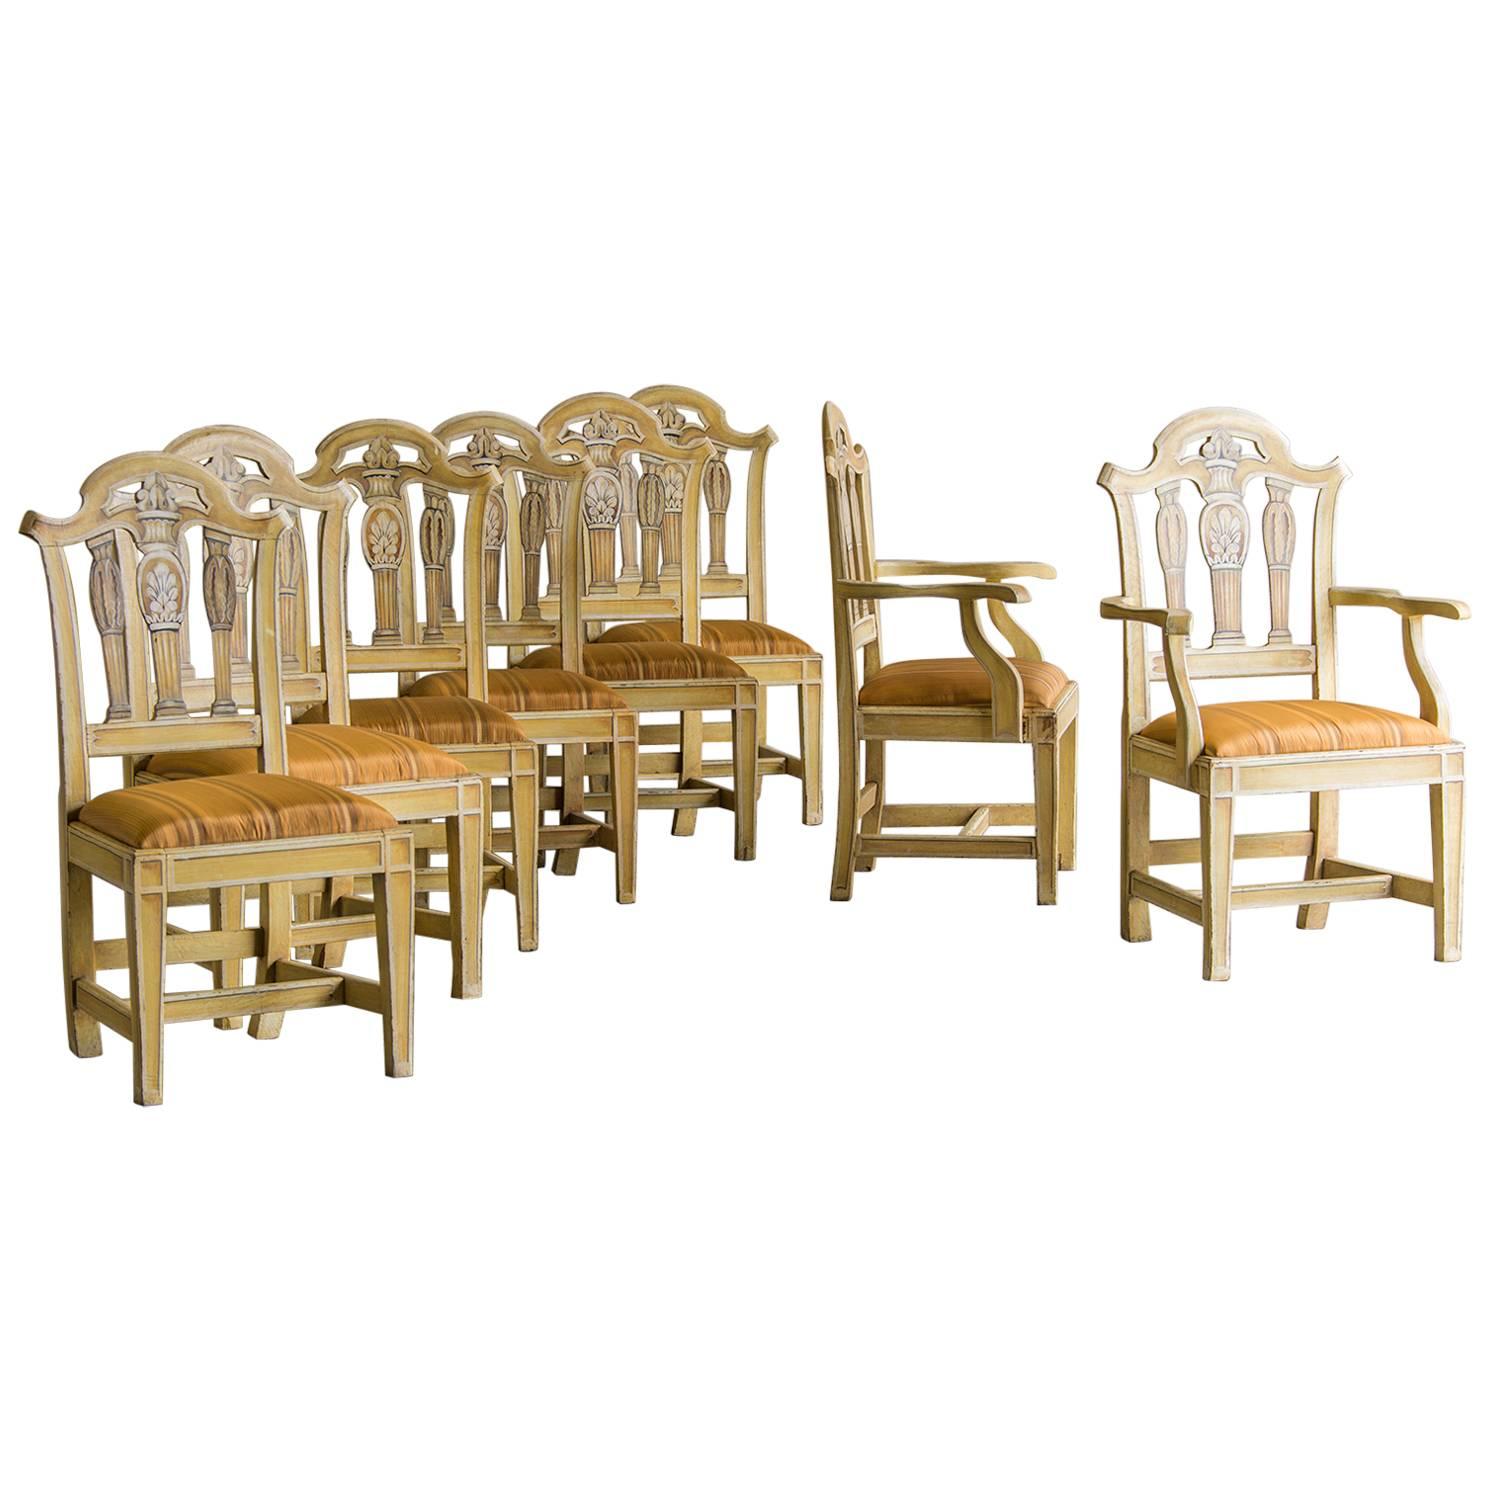 Set of Eight English Chippendale Style Chairs, Original Painted Decoration, 1890